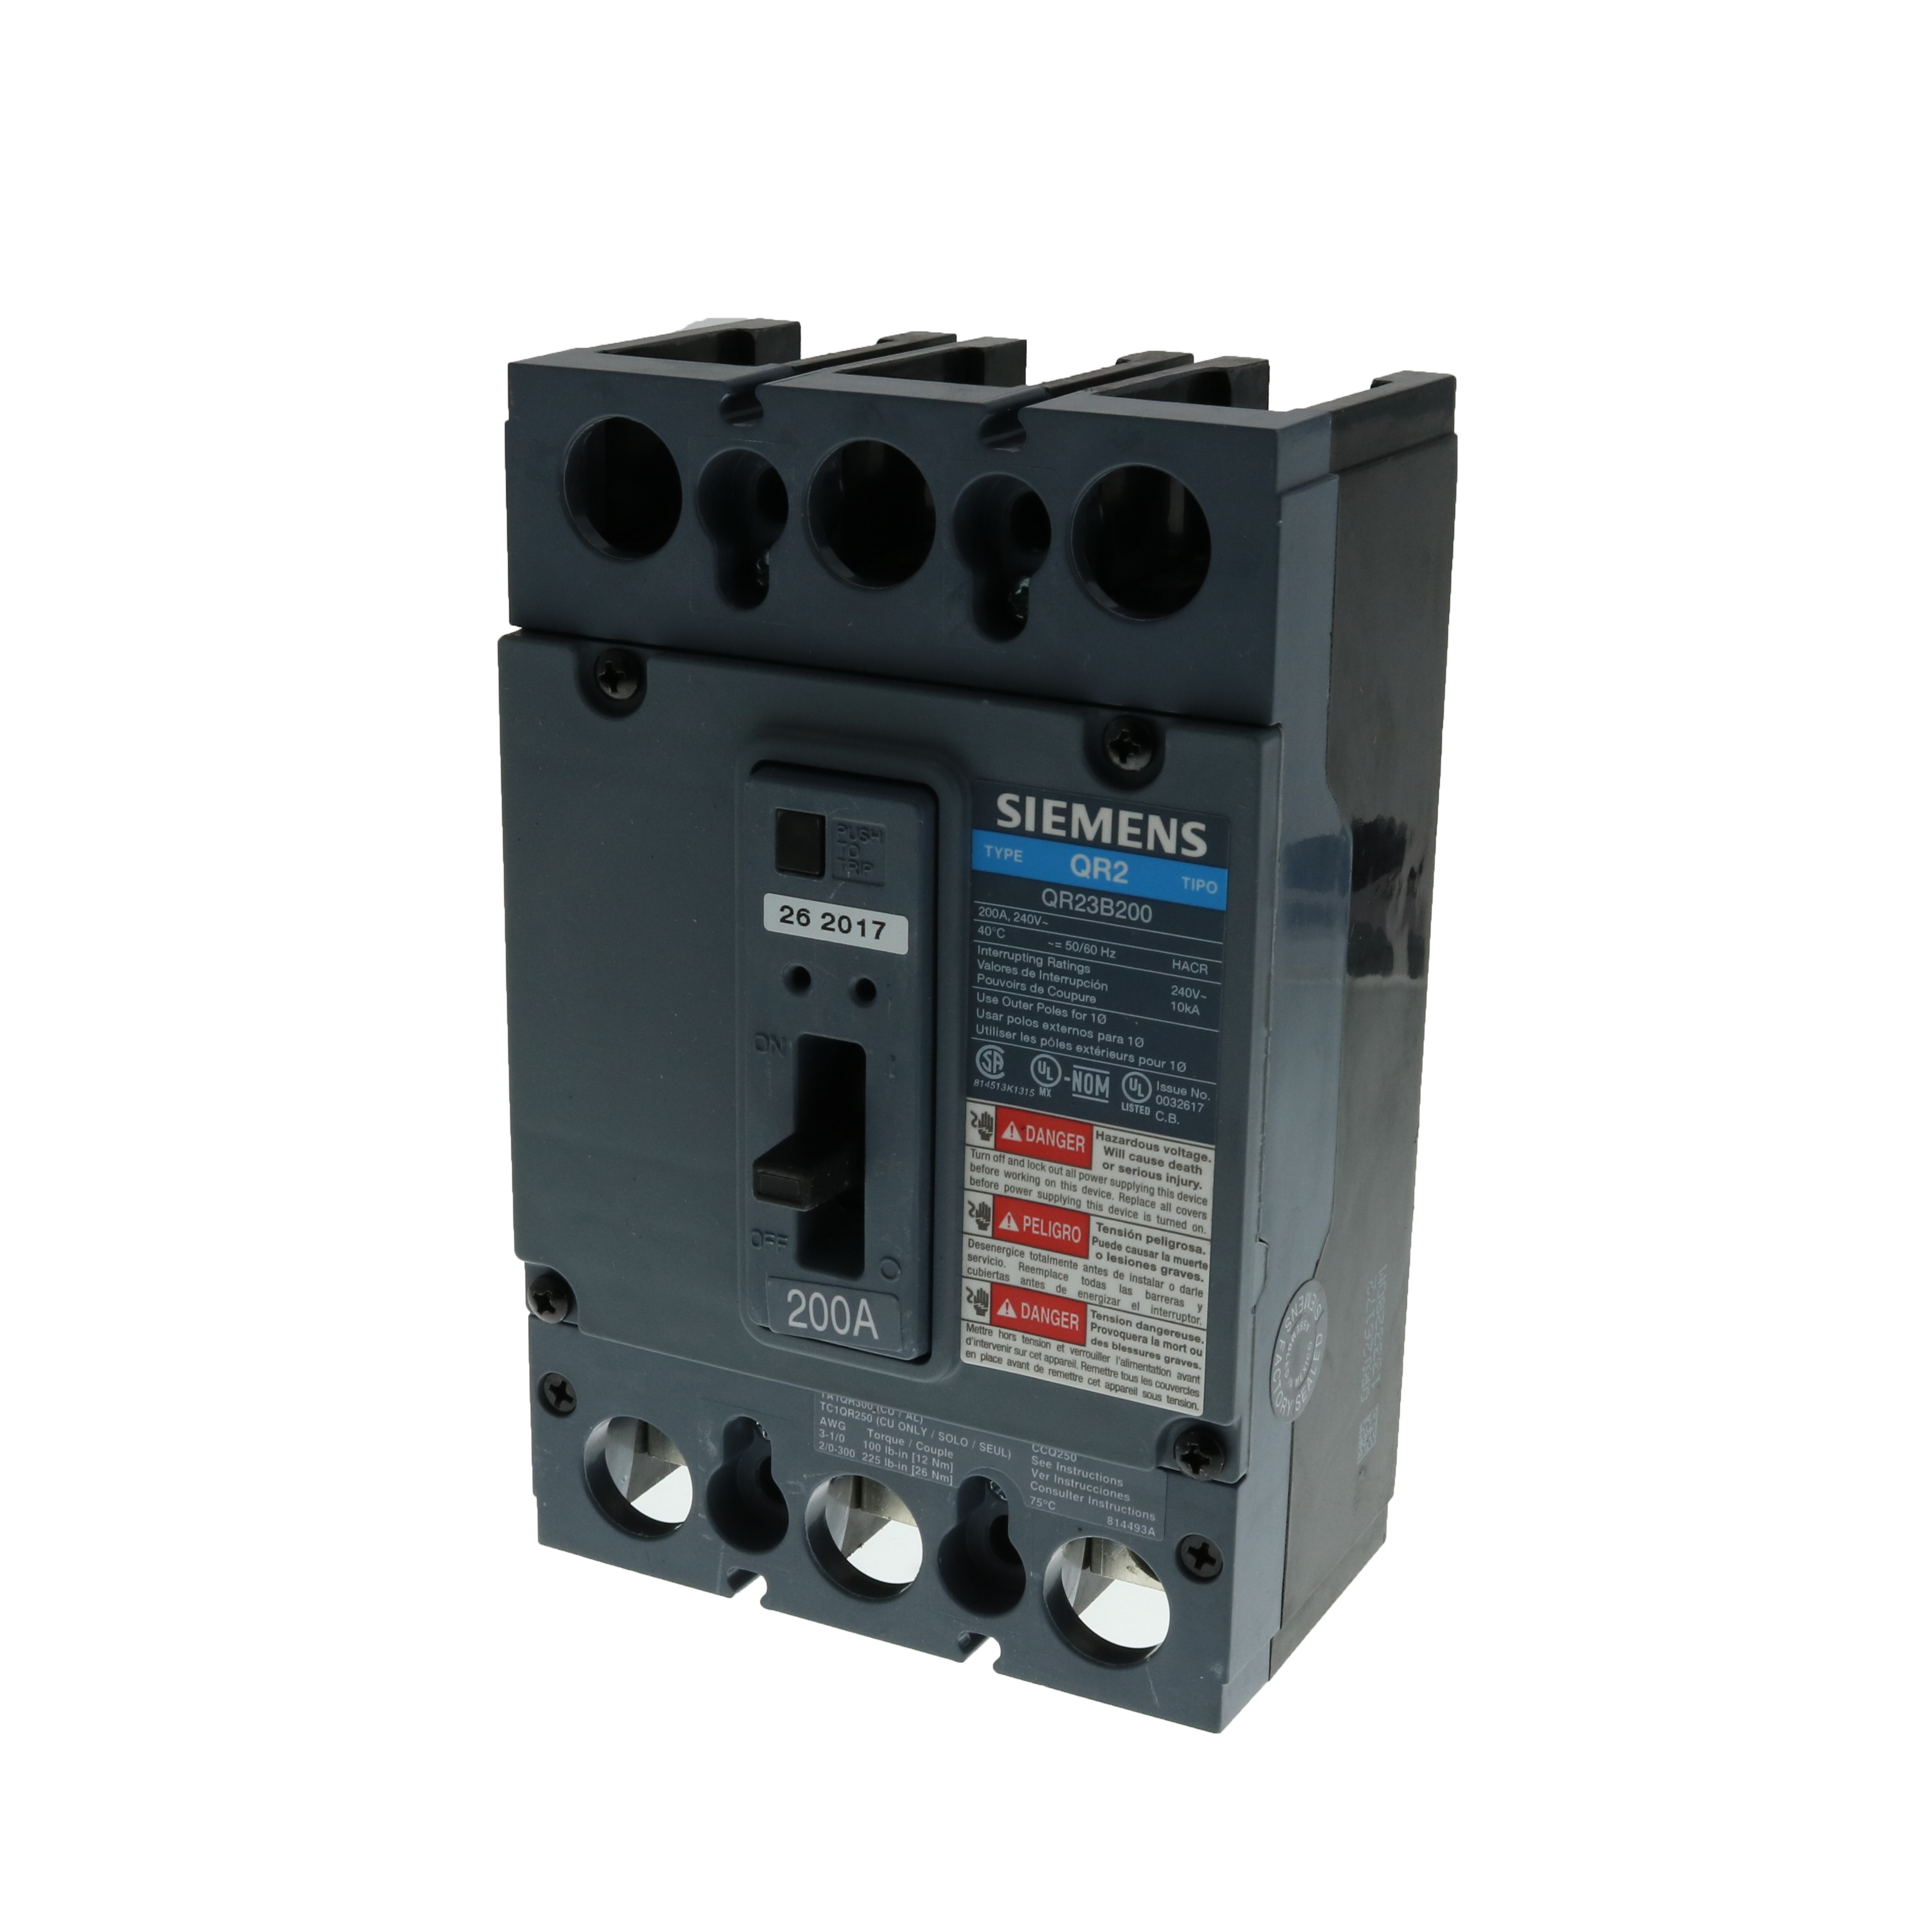 SIEMENS LOW VOLTAGE MOLDED CASE CIRCUIT BREAKER WITH THERMAL - MAGNETIC TRIP. QR FRAME STANDARD 40C BREAKER. 200A 3-POLE (10KA AT 240V). SPECIAL FEATURES NO LUGS INSTALLED.